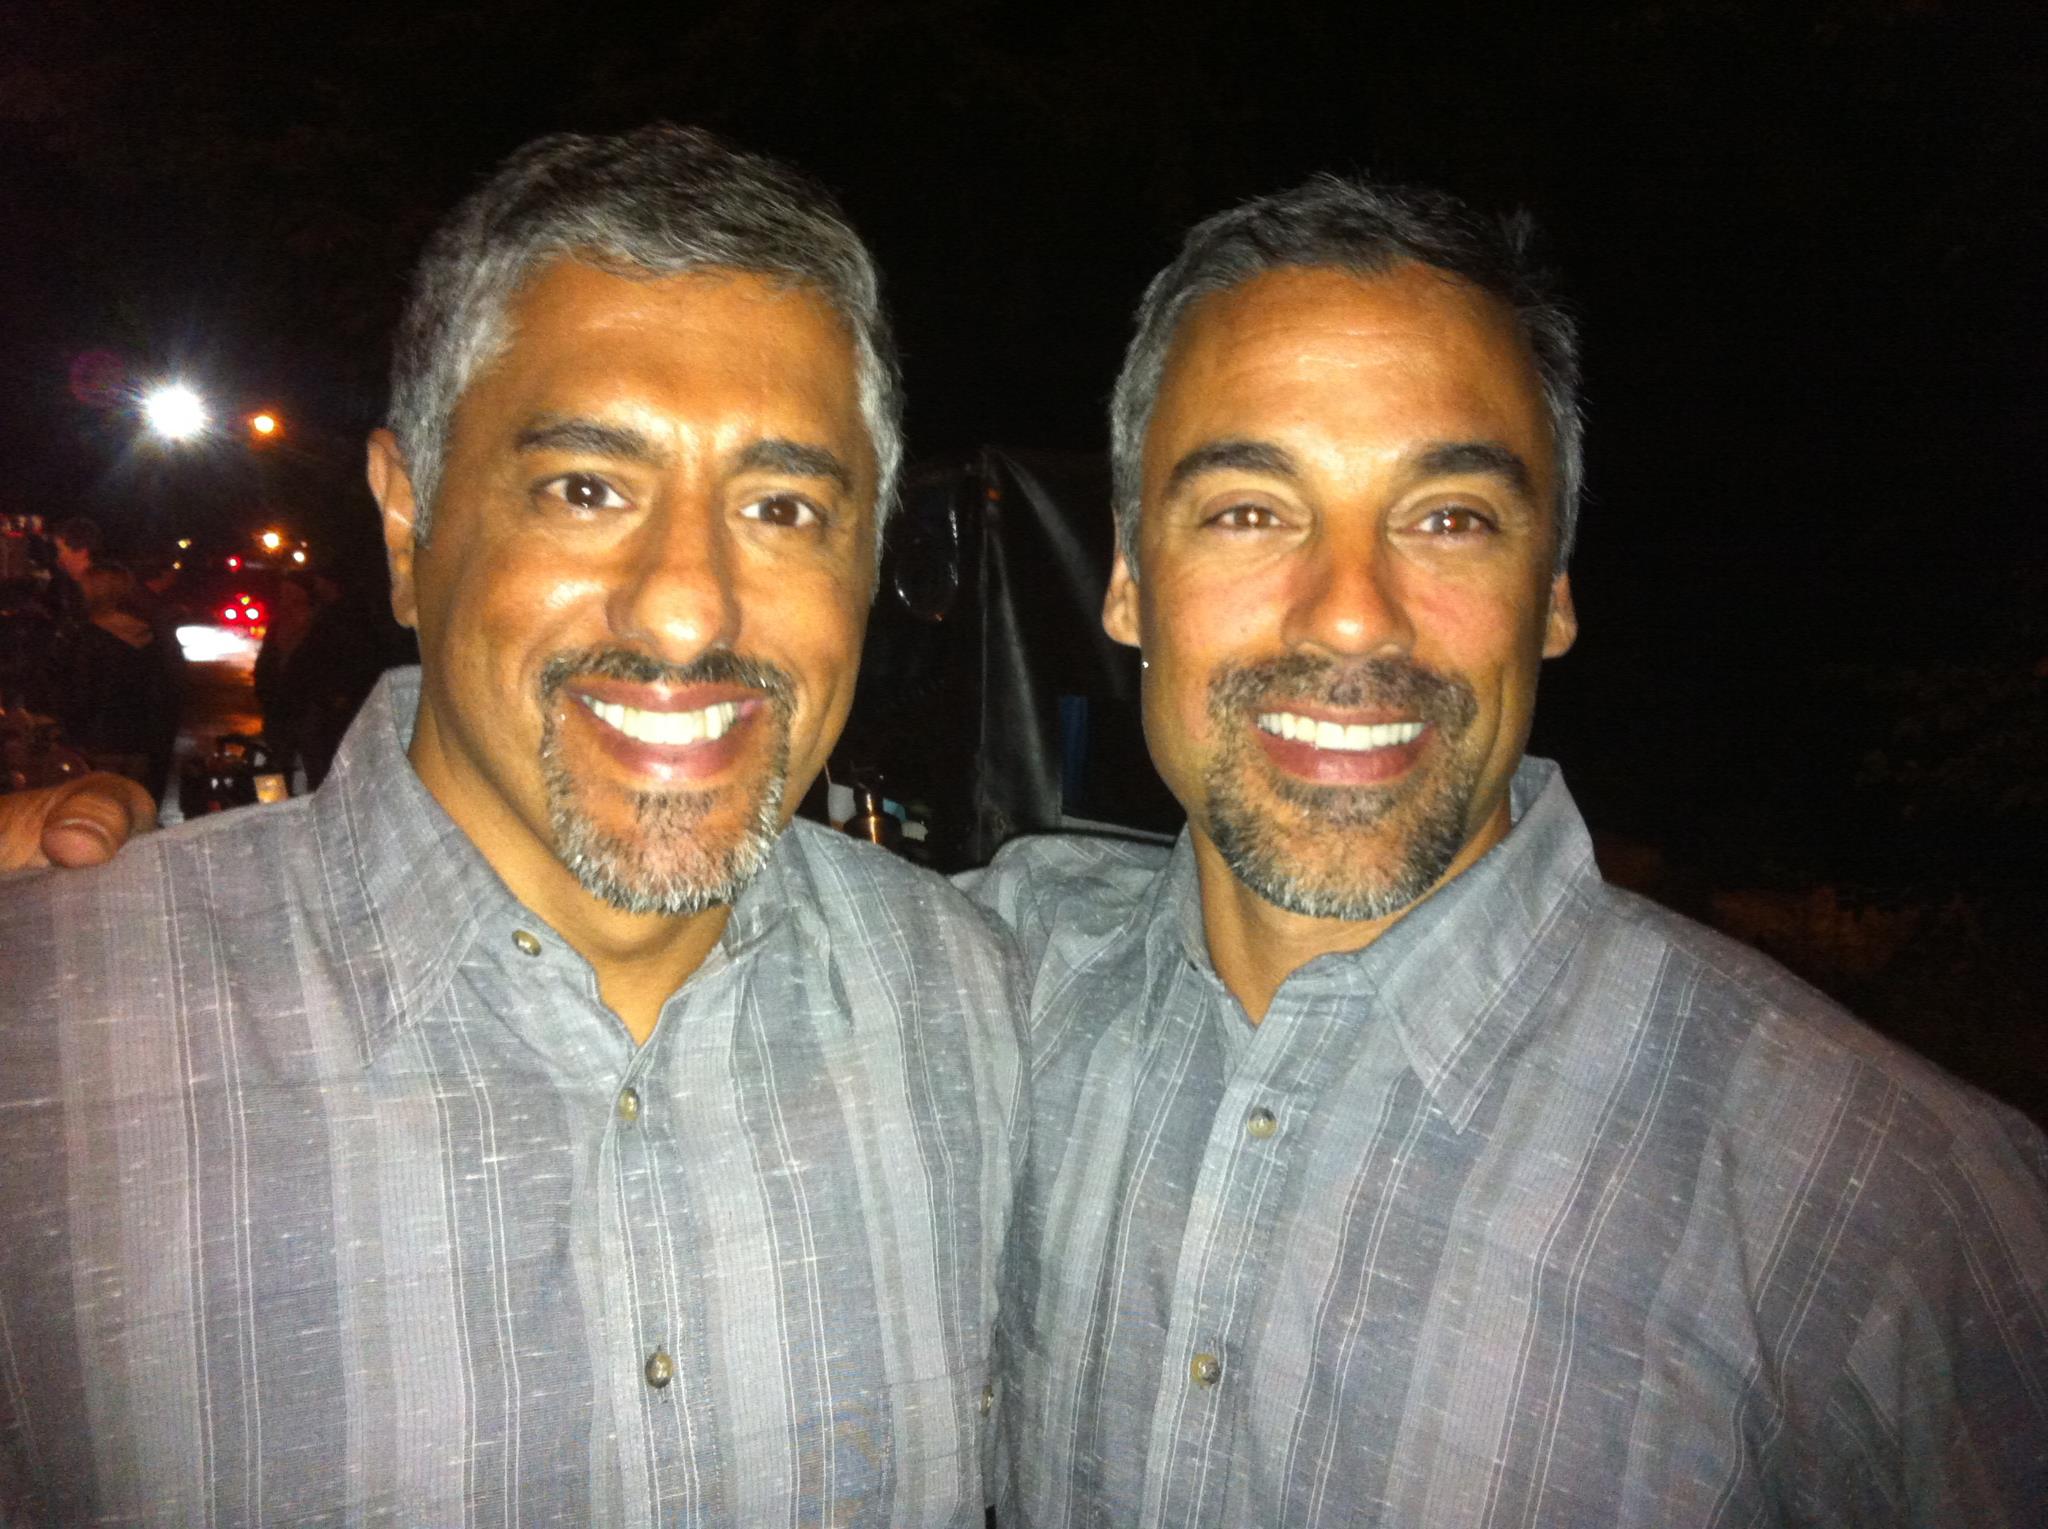 On the set of NBC Series PSYCH. Parm Soor as Daryush Hamidi. With stunt double Lauro Chartrand.